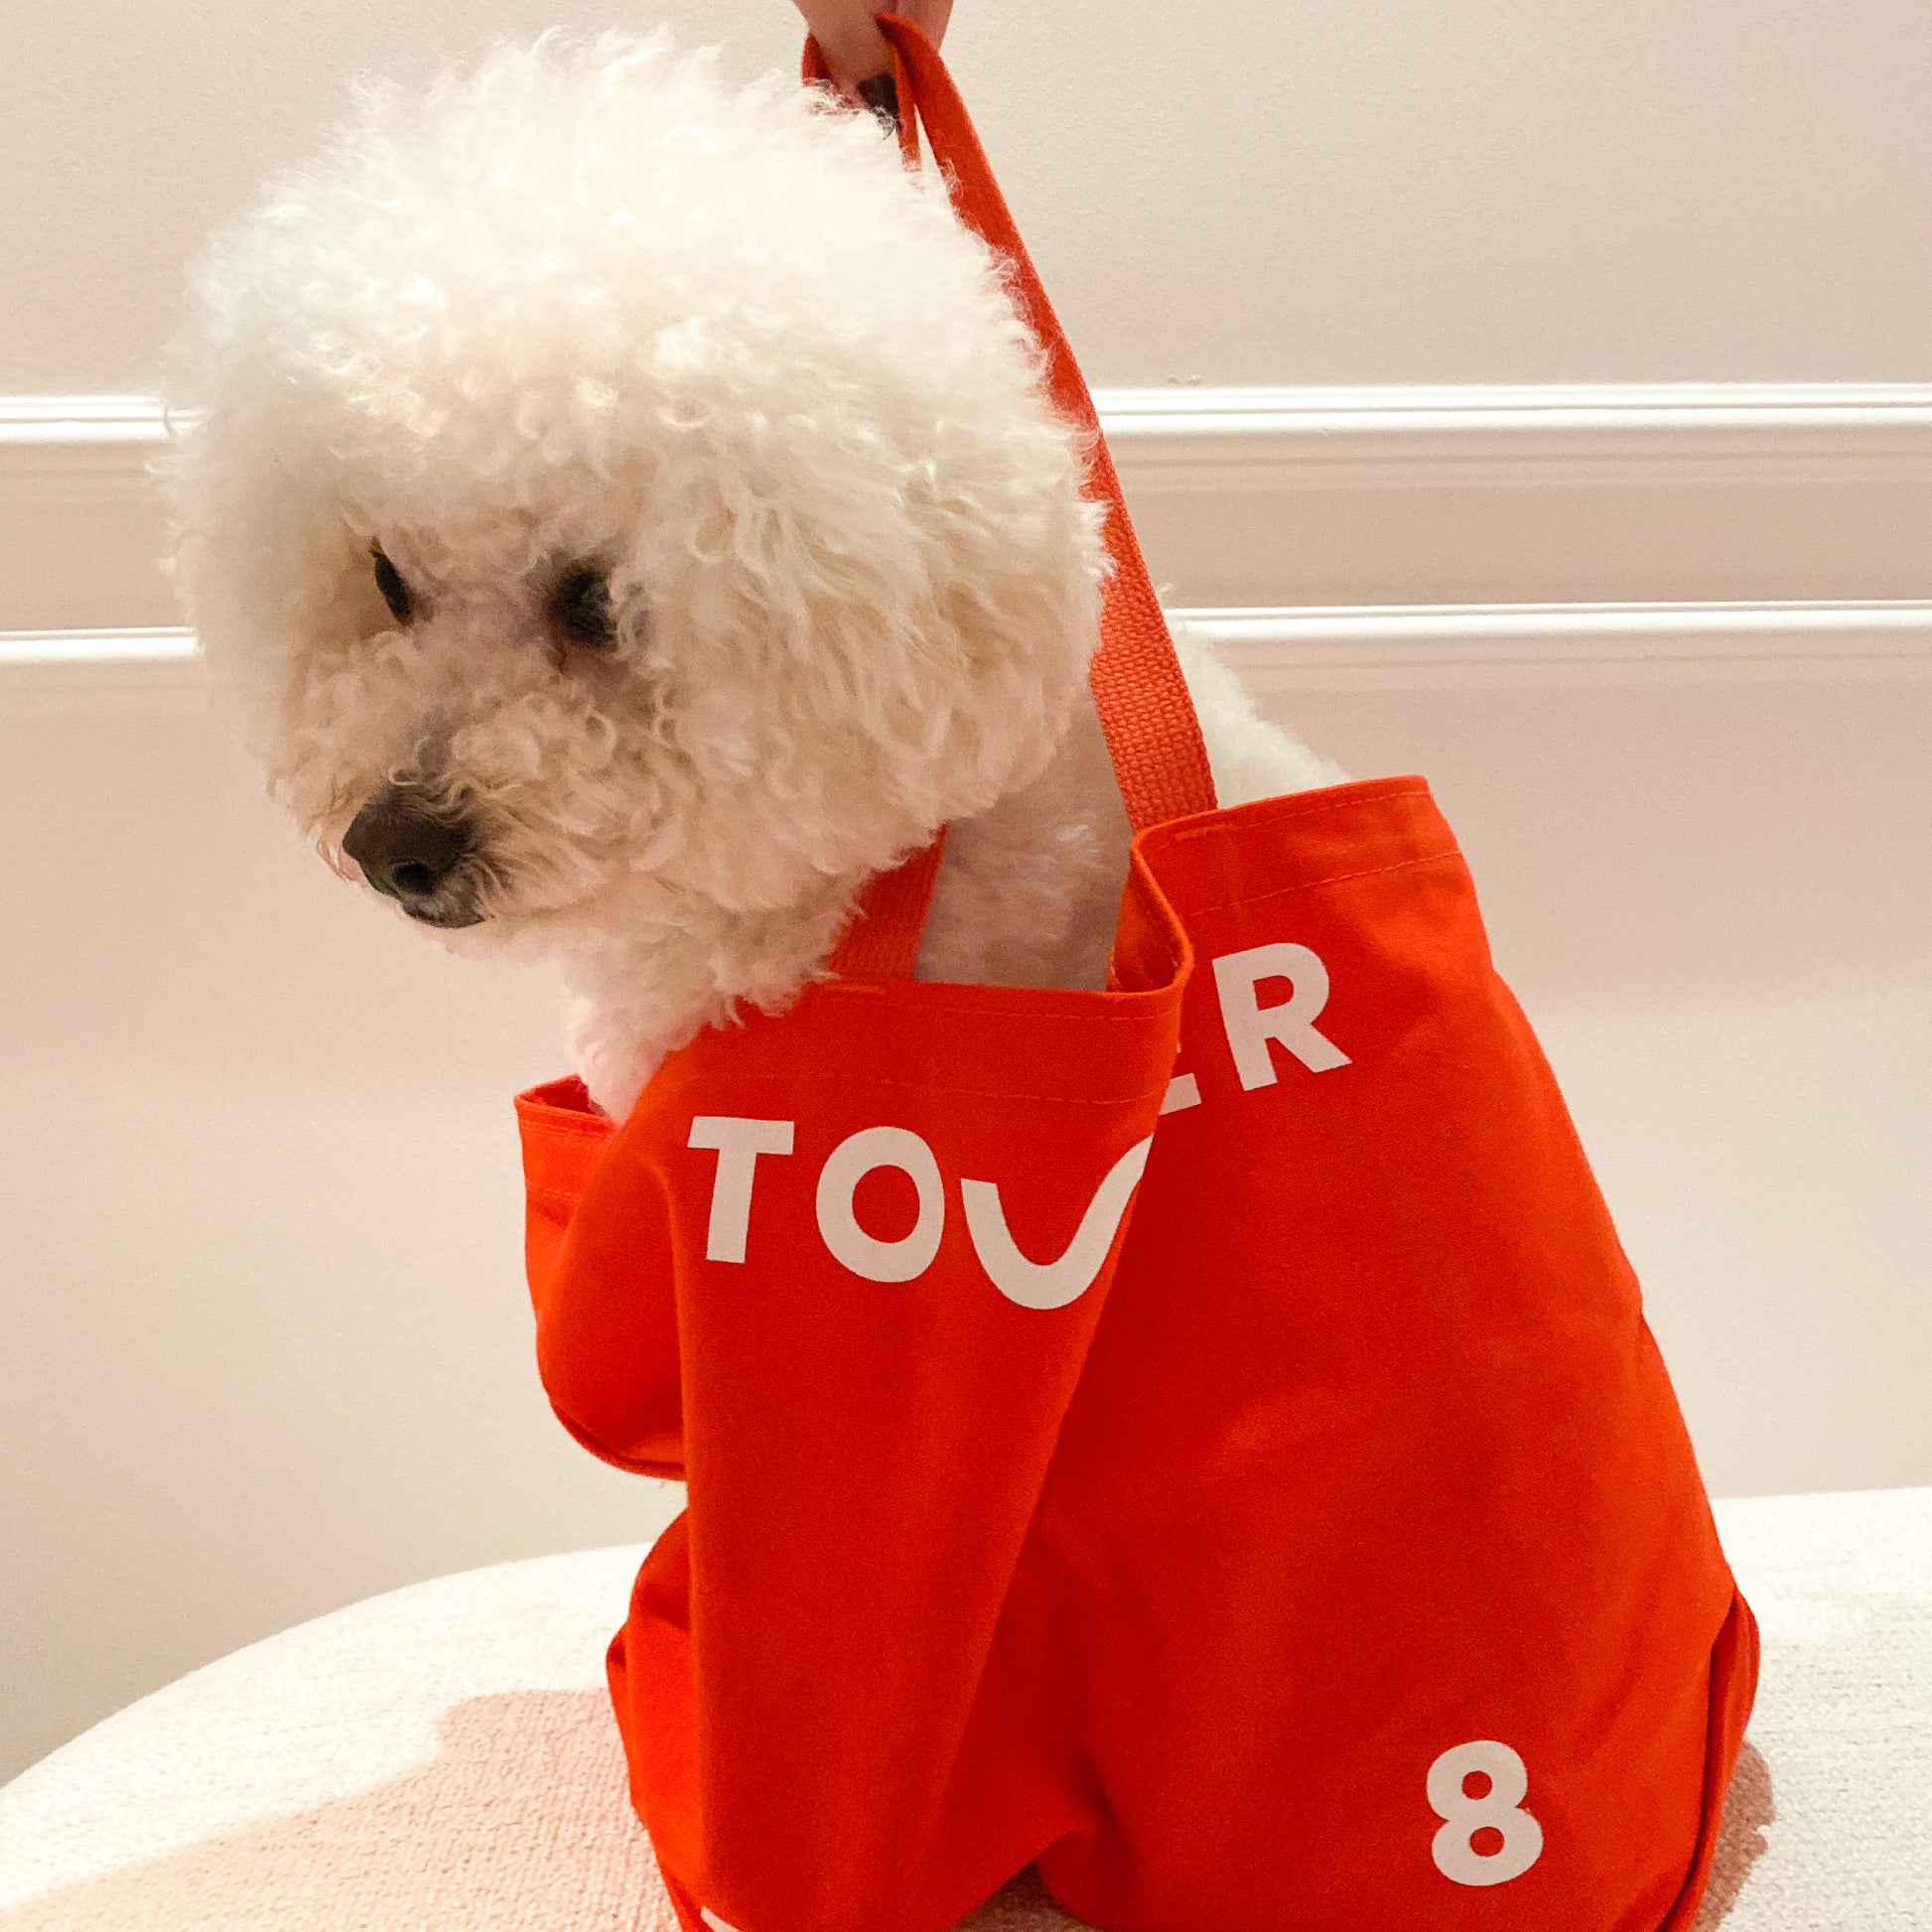 [Shared: The Tower 28 Beauty tote bag carrying a small dog inside